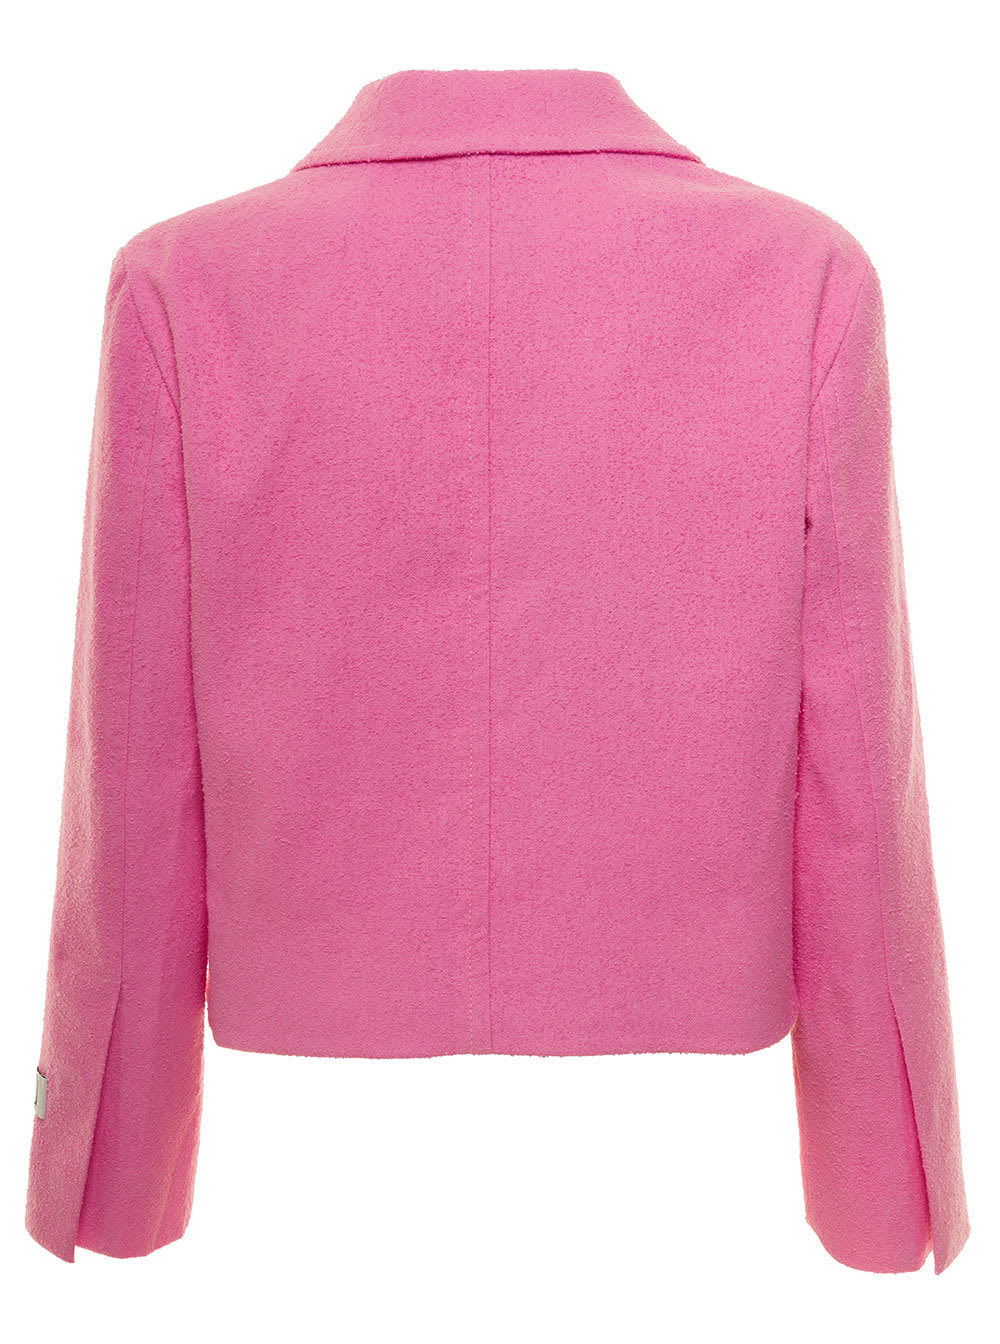 Shop Patou Pink Jacket With Branded Buttons In Cotton Blend Tweed Woman